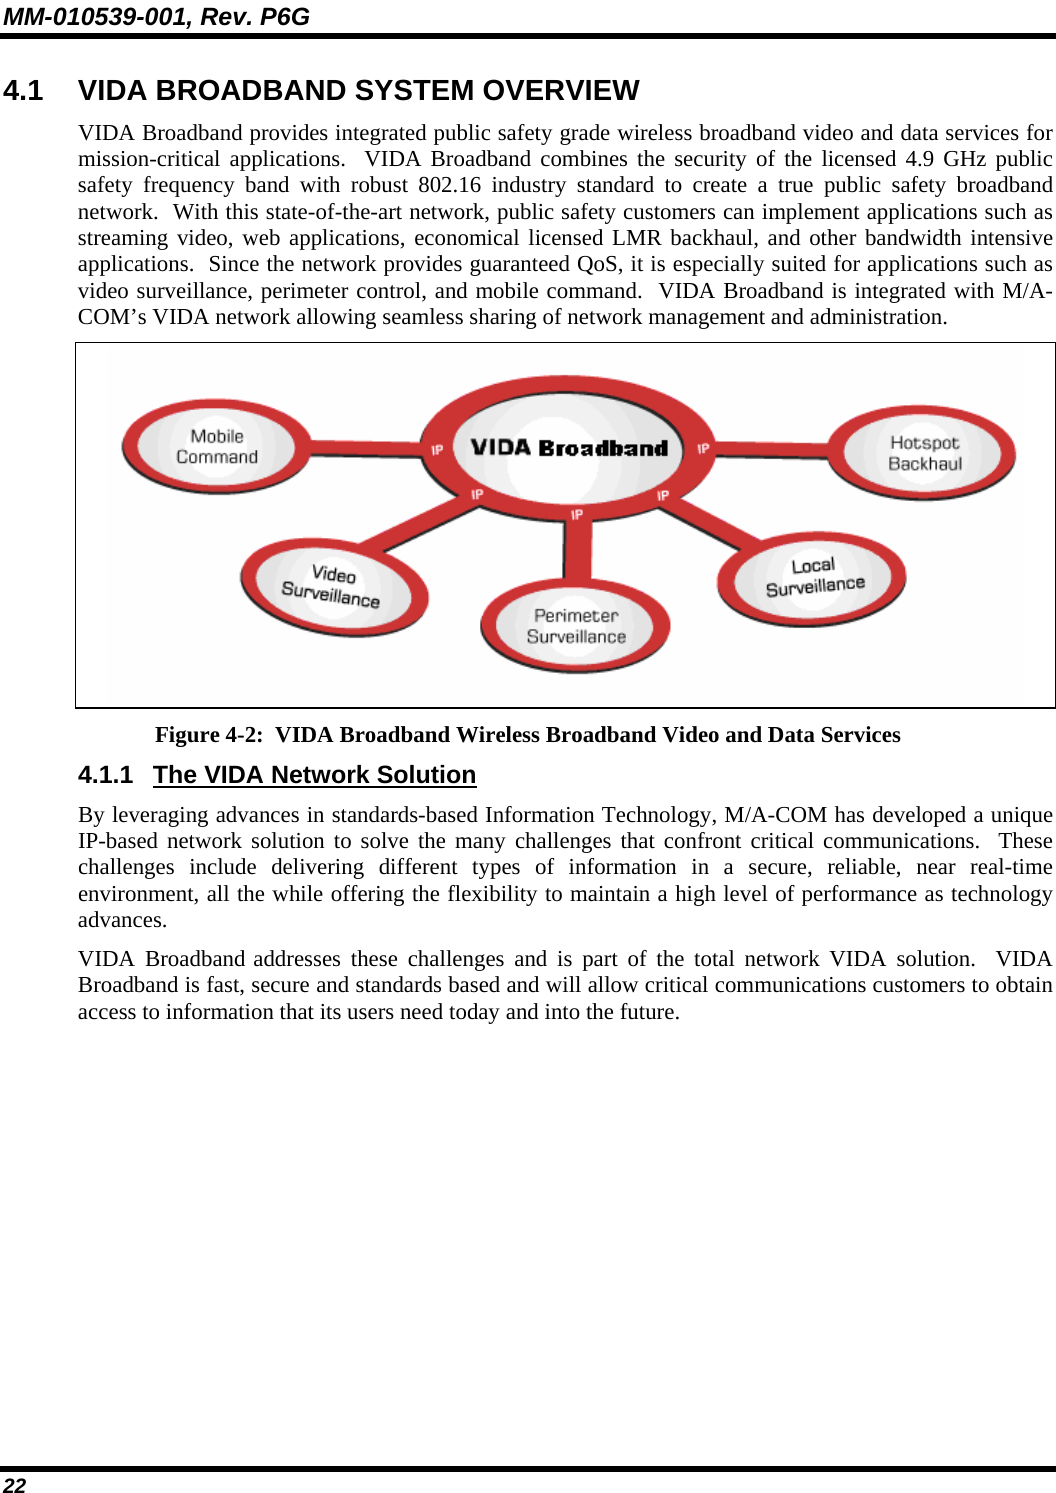 MM-010539-001, Rev. P6G 22 4.1  VIDA BROADBAND SYSTEM OVERVIEW VIDA Broadband provides integrated public safety grade wireless broadband video and data services for mission-critical applications.  VIDA Broadband combines the security of the licensed 4.9 GHz public safety frequency band with robust 802.16 industry standard to create a true public safety broadband network.  With this state-of-the-art network, public safety customers can implement applications such as streaming video, web applications, economical licensed LMR backhaul, and other bandwidth intensive applications.  Since the network provides guaranteed QoS, it is especially suited for applications such as video surveillance, perimeter control, and mobile command.  VIDA Broadband is integrated with M/A-COM’s VIDA network allowing seamless sharing of network management and administration.     Figure 4-2:  VIDA Broadband Wireless Broadband Video and Data Services 4.1.1  The VIDA Network Solution By leveraging advances in standards-based Information Technology, M/A-COM has developed a unique IP-based network solution to solve the many challenges that confront critical communications.  These challenges include delivering different types of information in a secure, reliable, near real-time environment, all the while offering the flexibility to maintain a high level of performance as technology advances. VIDA Broadband addresses these challenges and is part of the total network VIDA solution.  VIDA Broadband is fast, secure and standards based and will allow critical communications customers to obtain access to information that its users need today and into the future.   